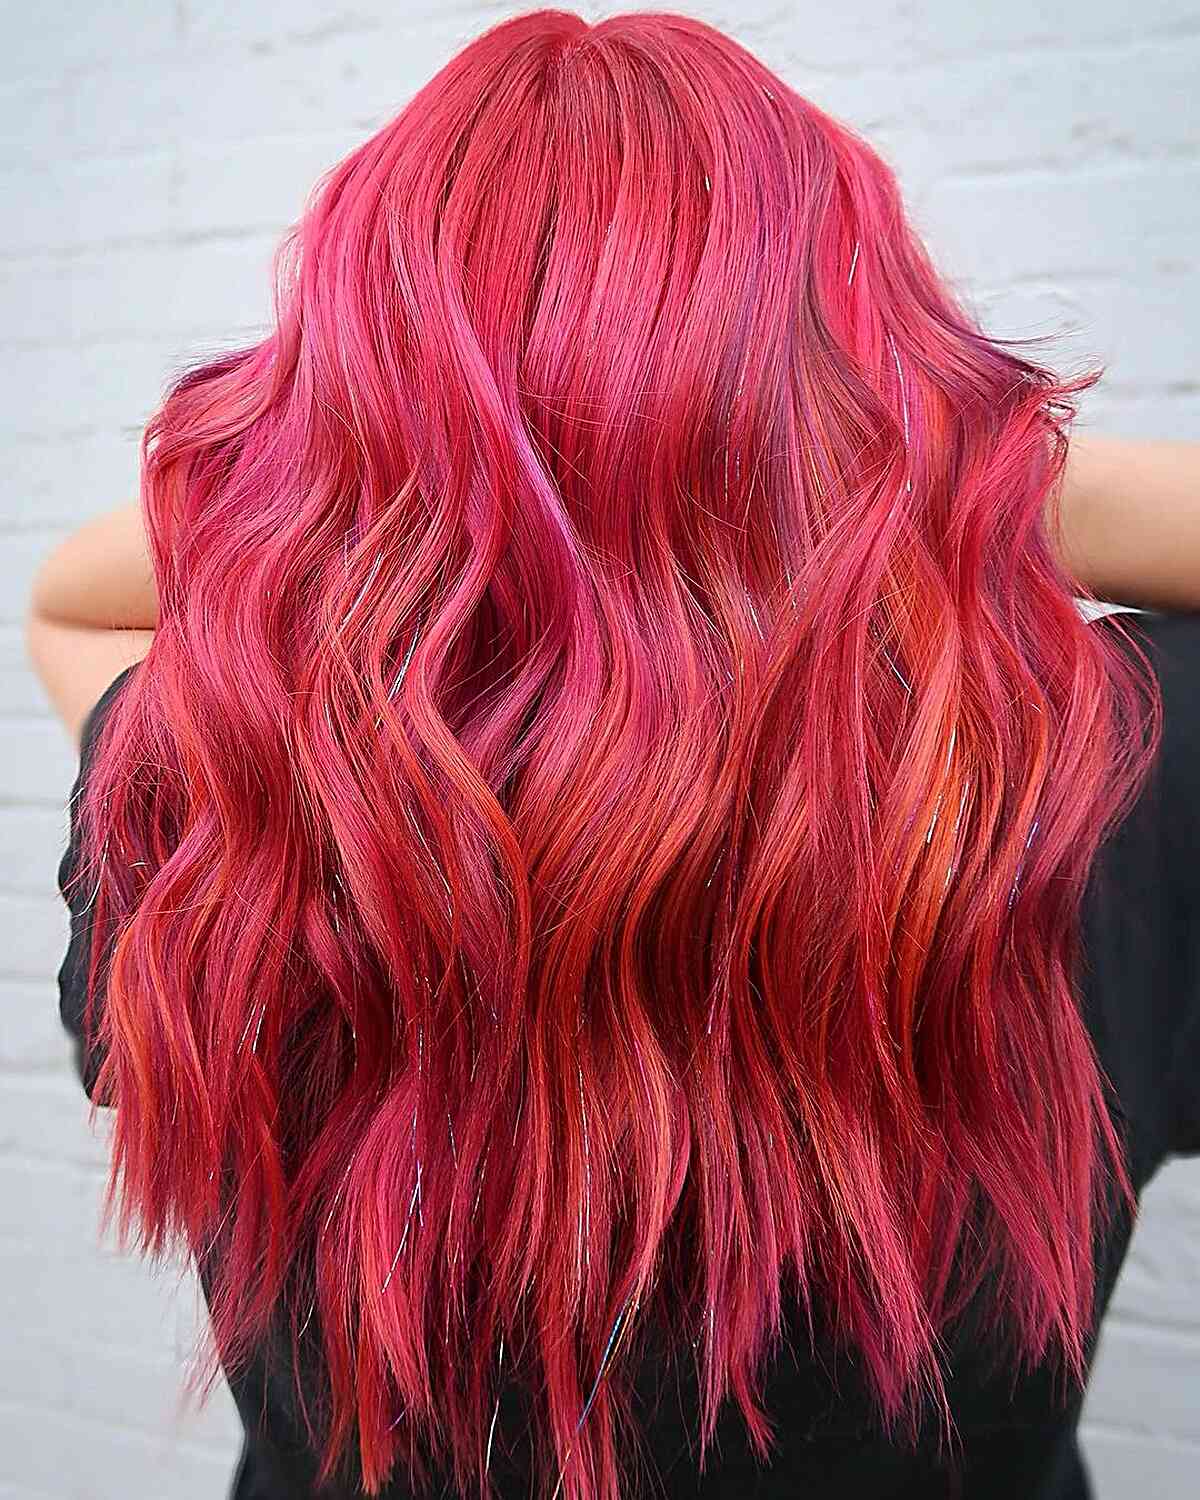 Bright Red Balayage with Subtle Orange Highlights